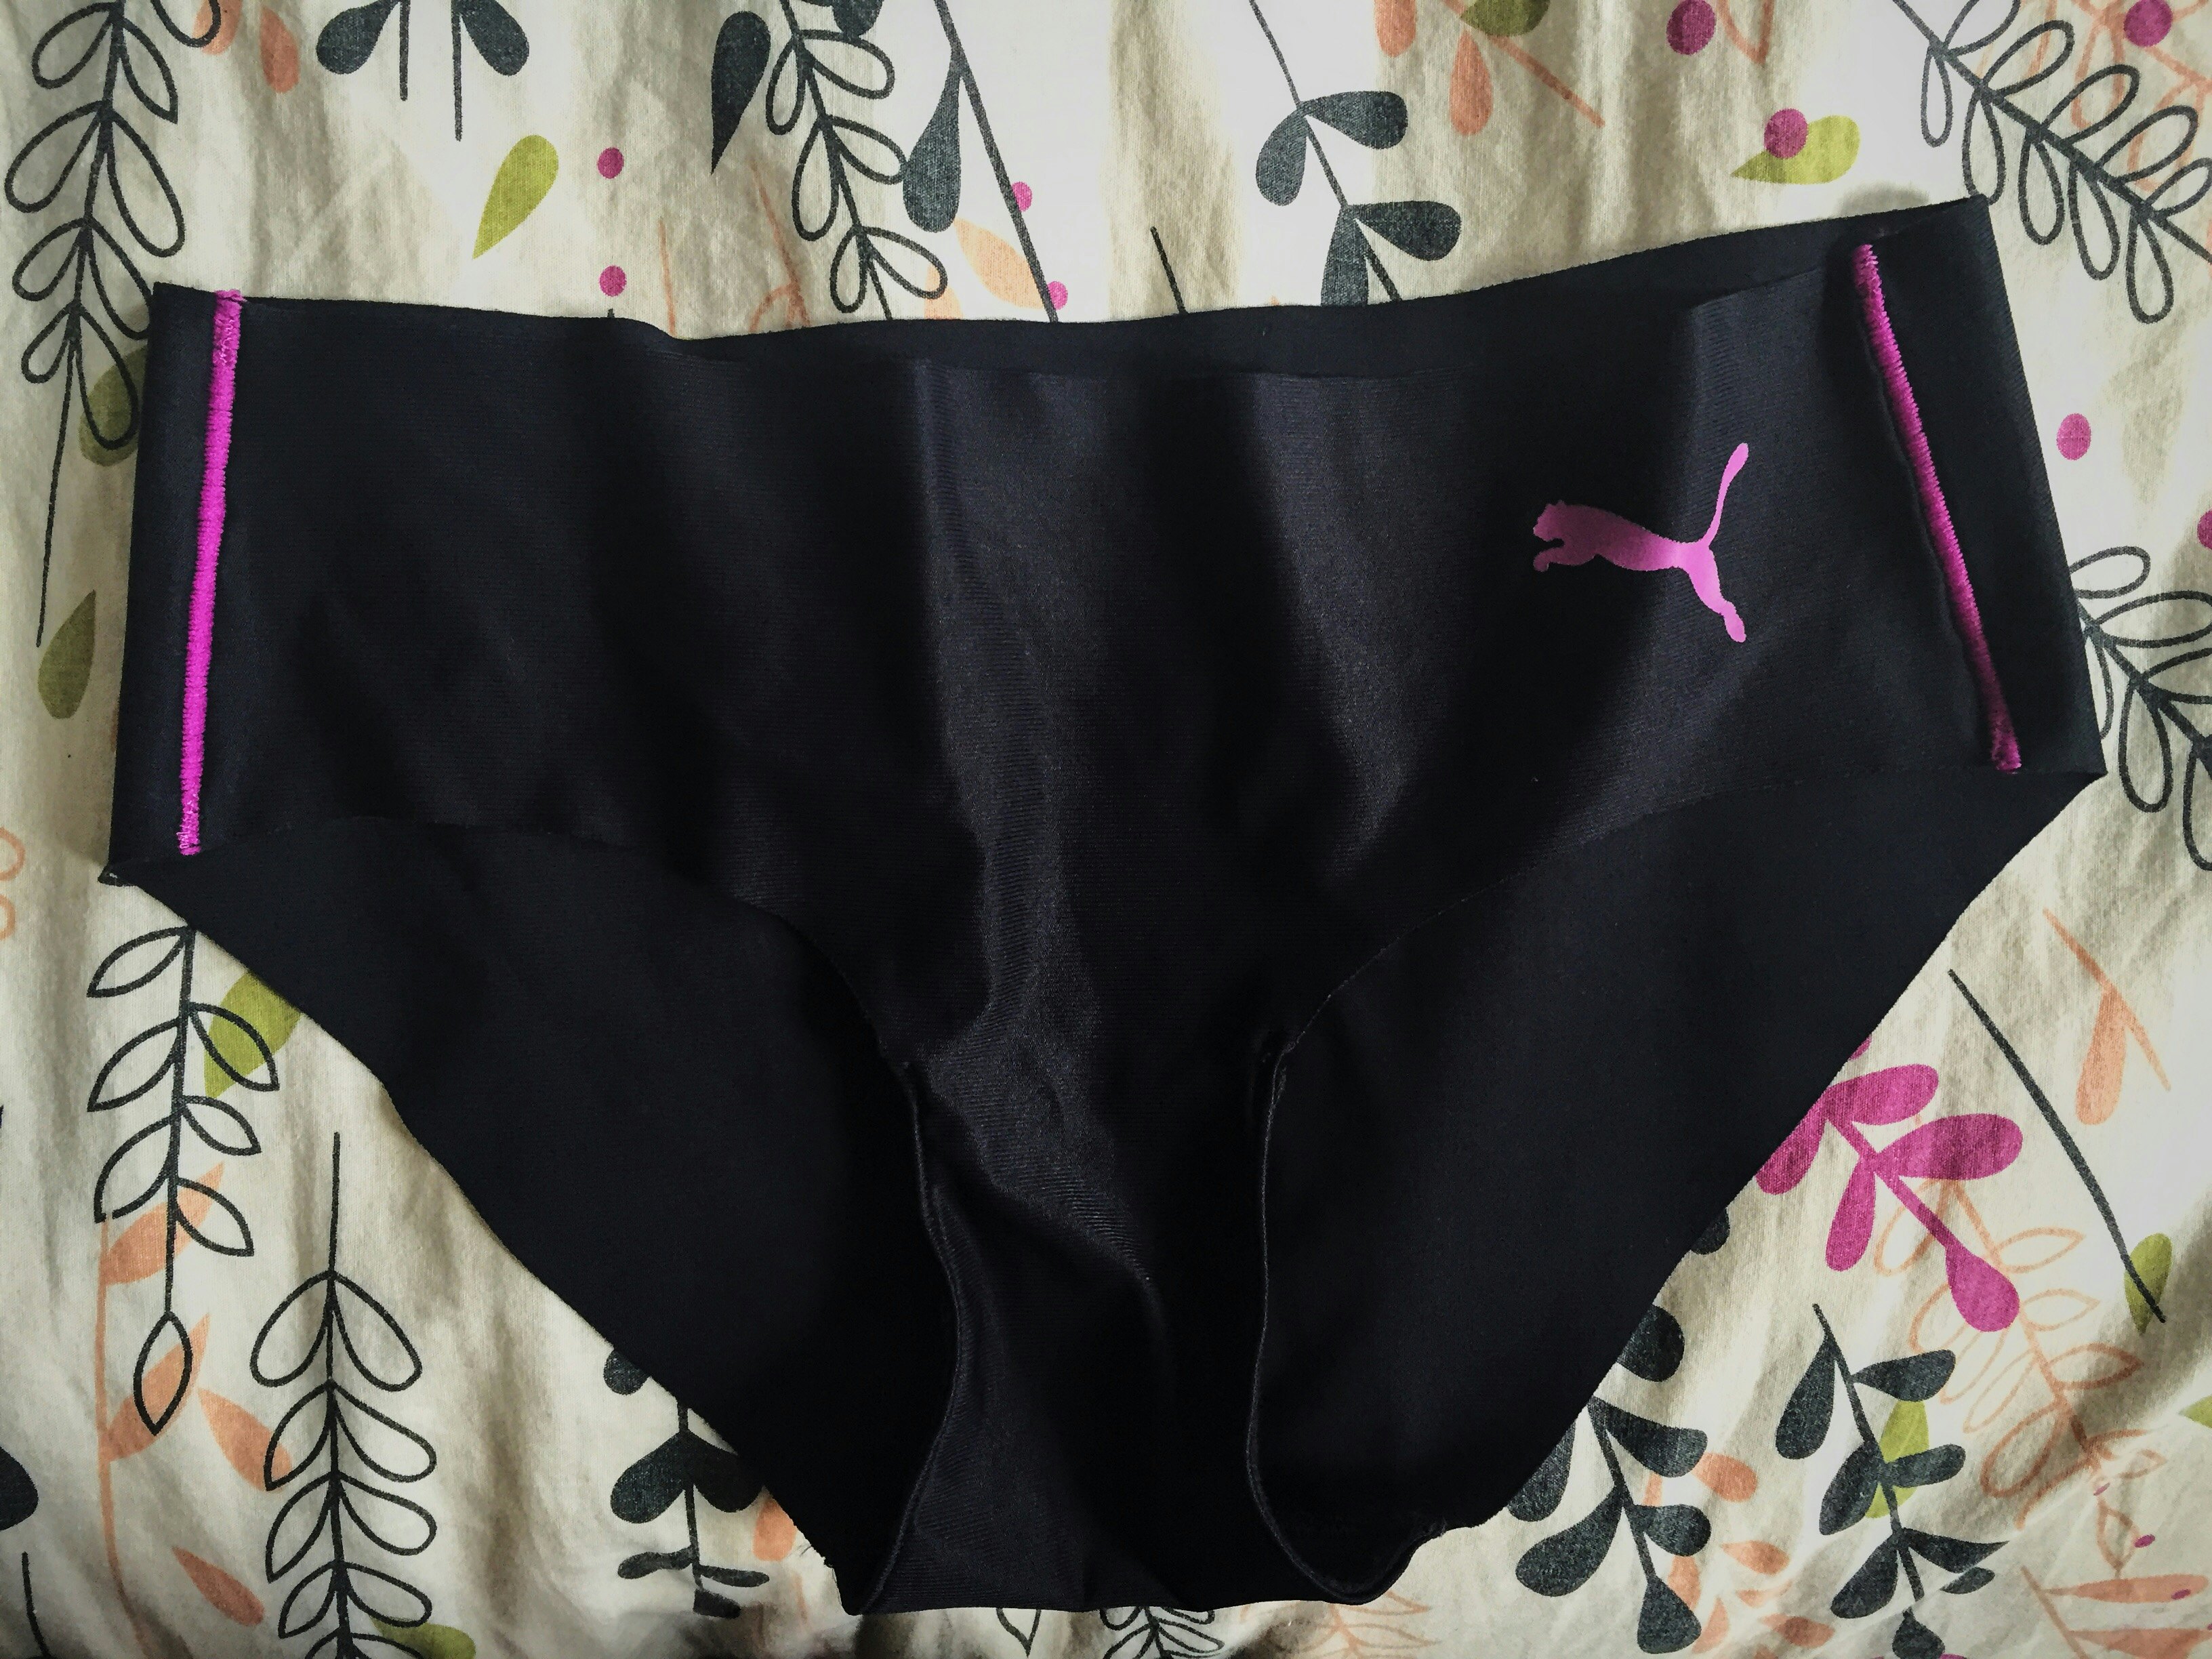 I Tried Cheap Versus Expensive Underwear For A Week & Here's What Happened  — PHOTOS